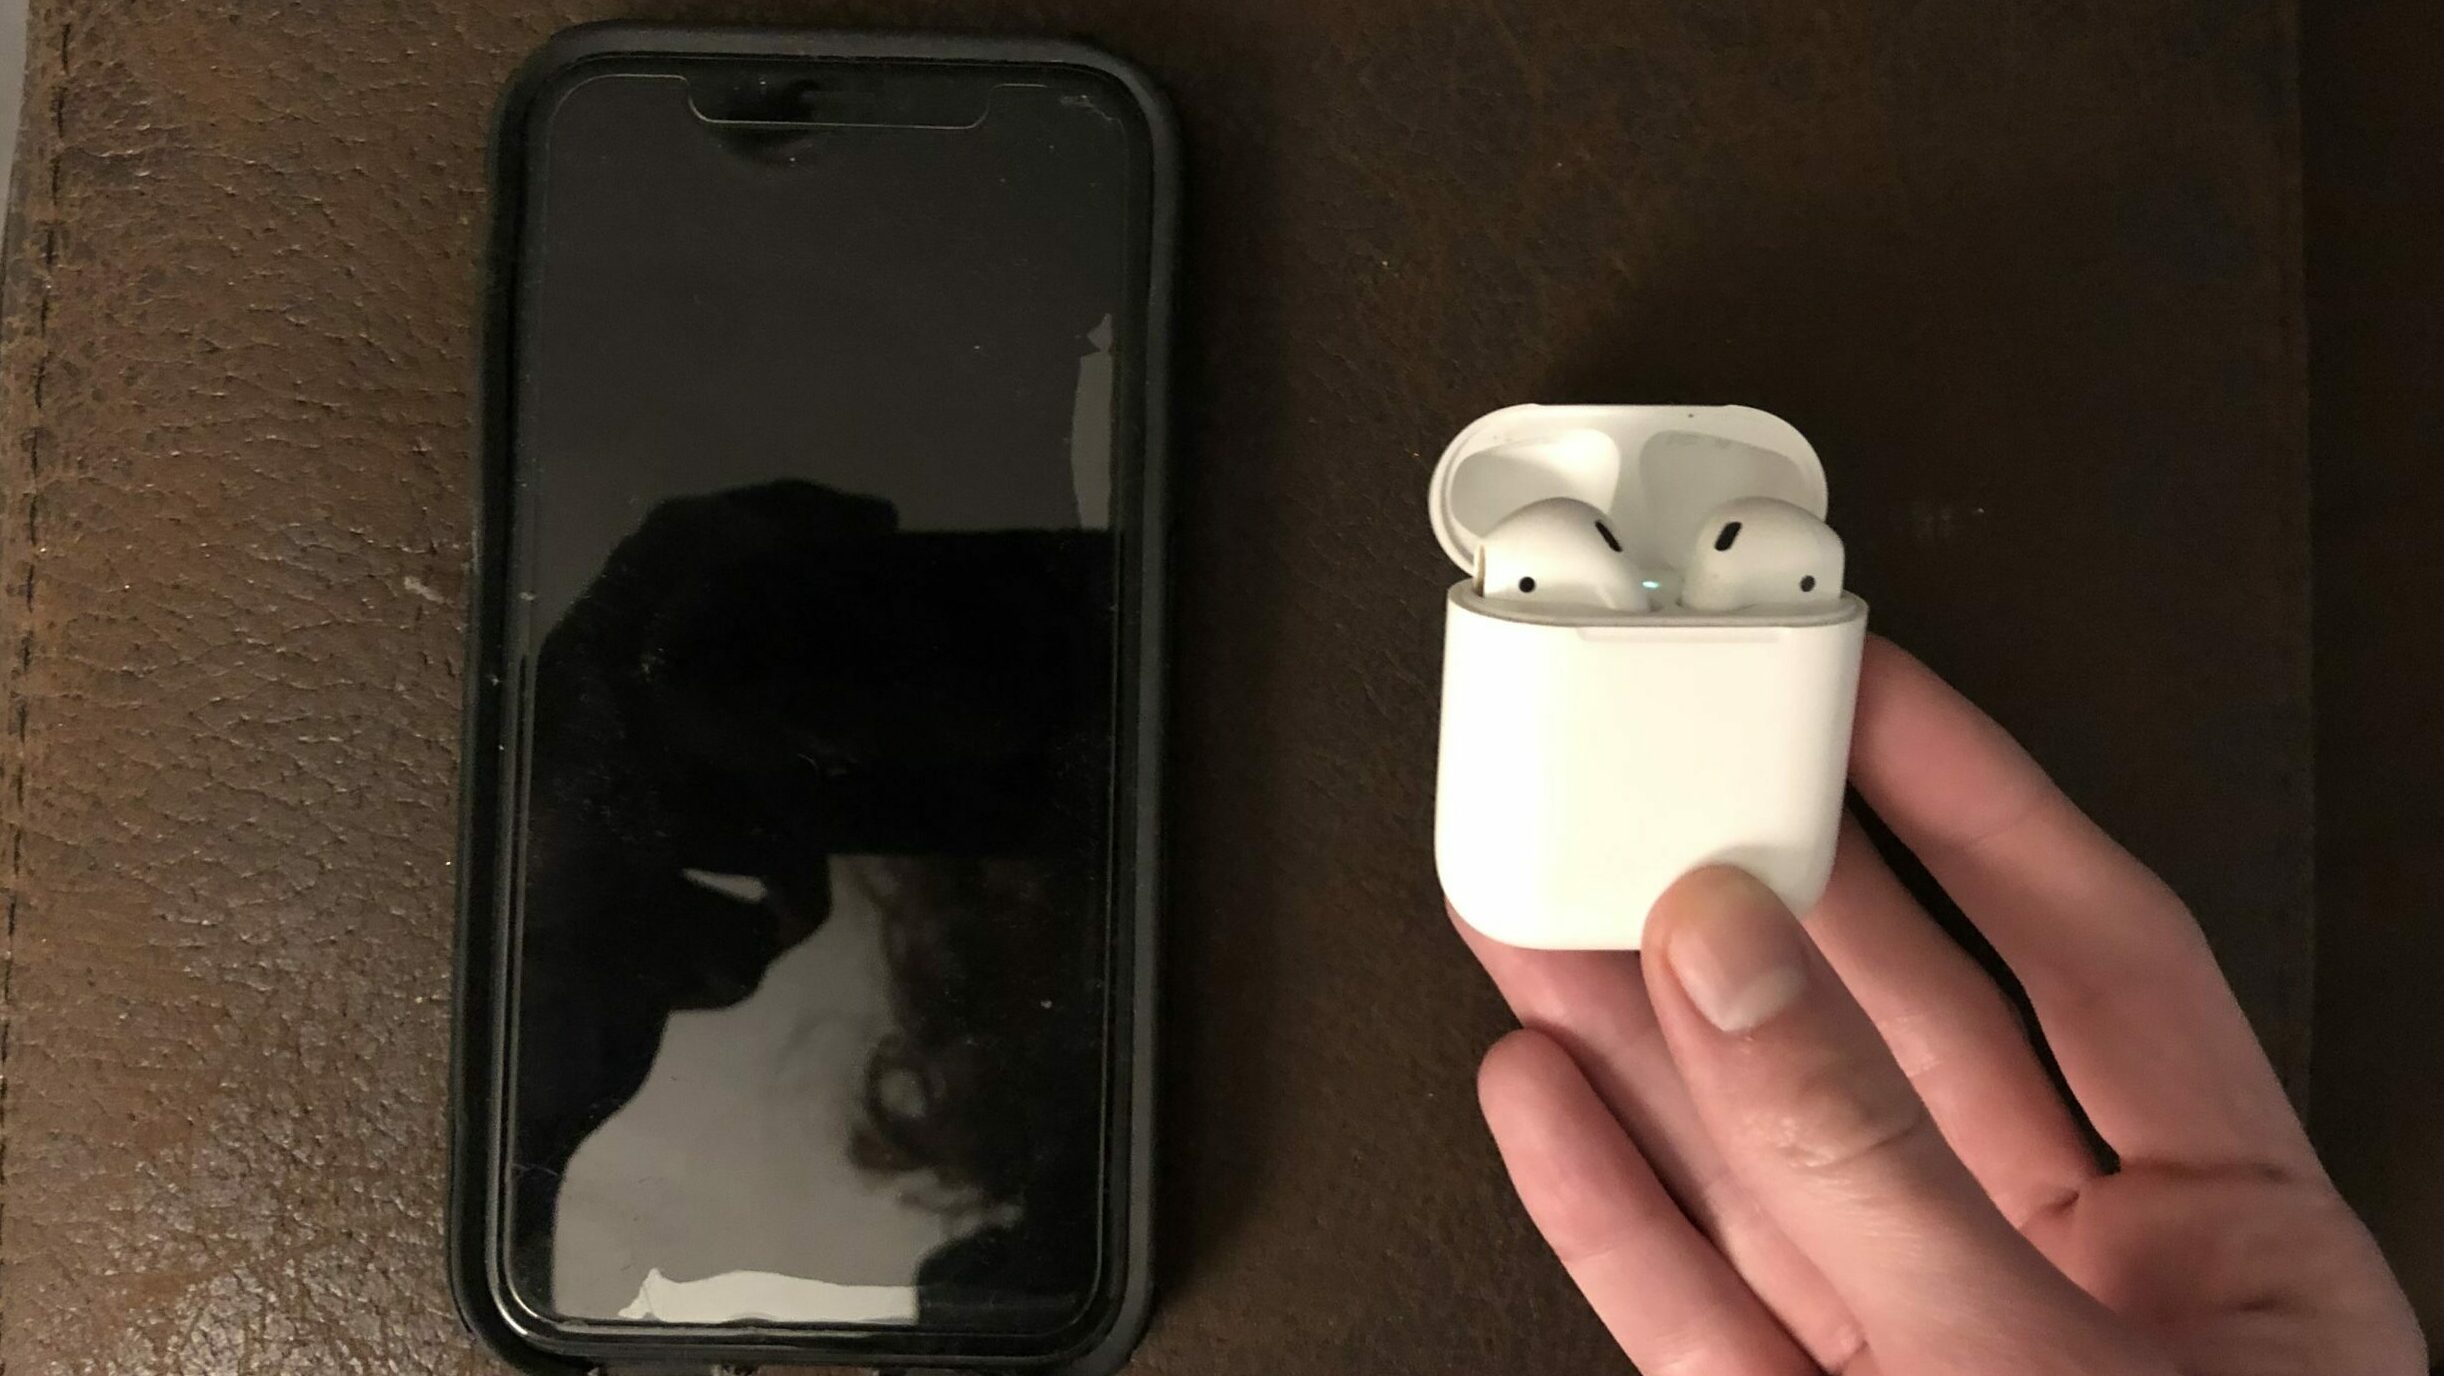 Connect yoru AirPods To your iPhone